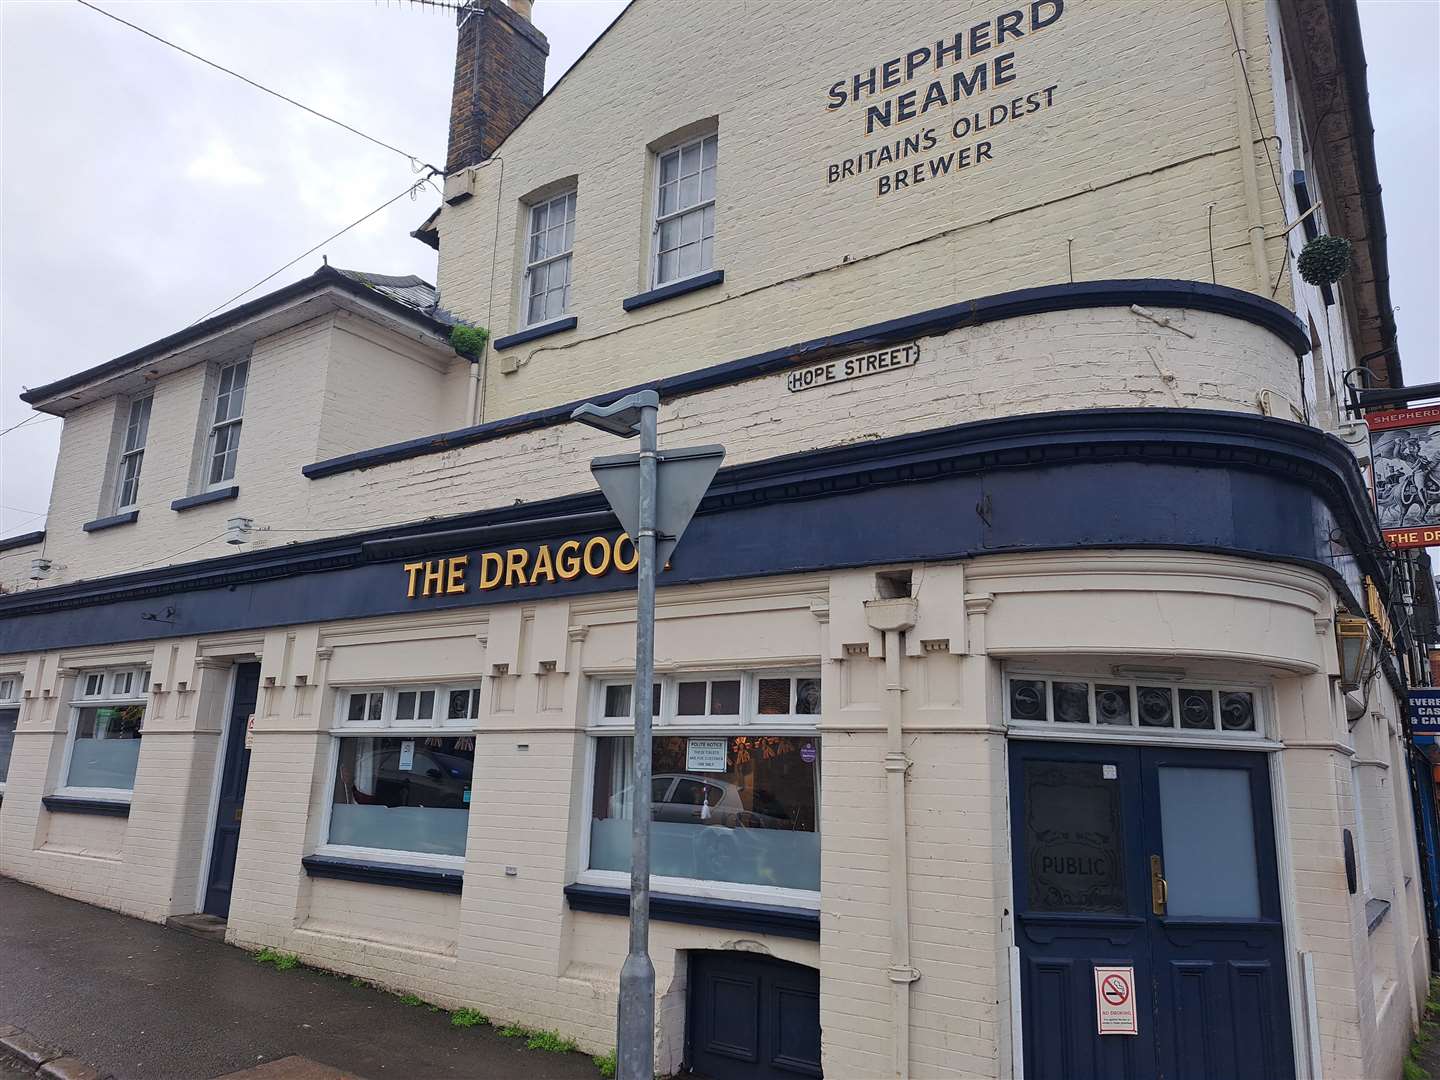 The Dragoon pub closes later this month